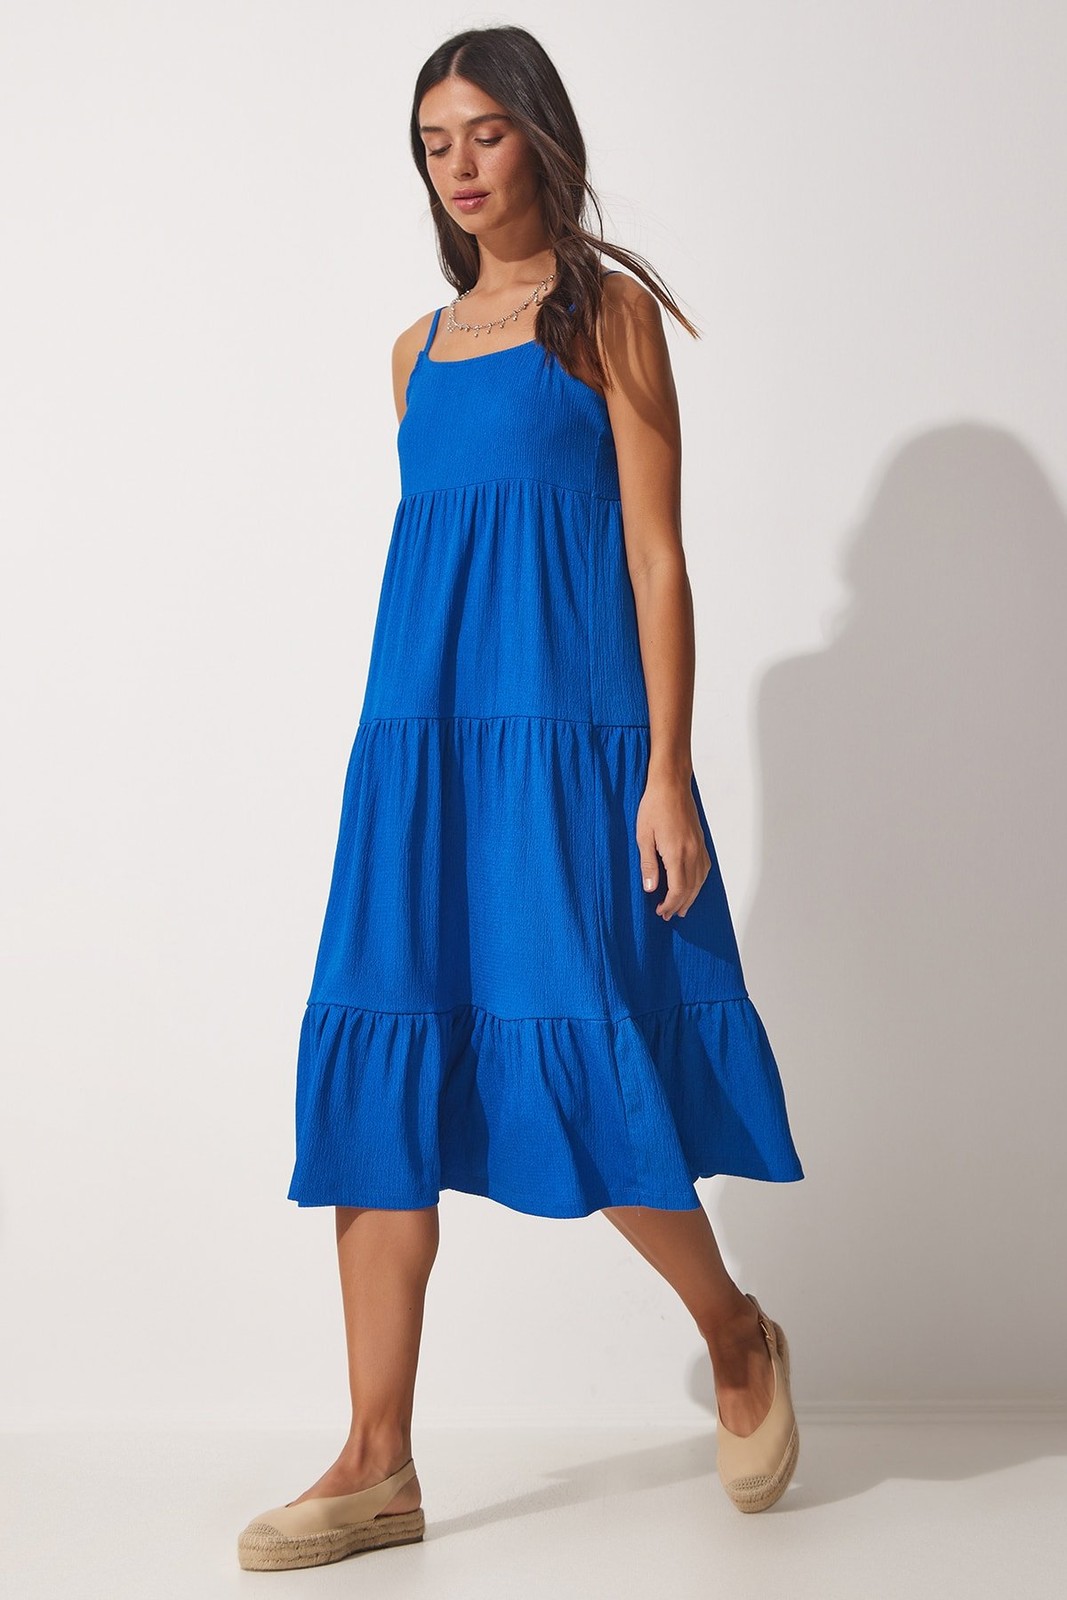 Happiness İstanbul Women's Blue Halter Pleats Summer Knitted Dress